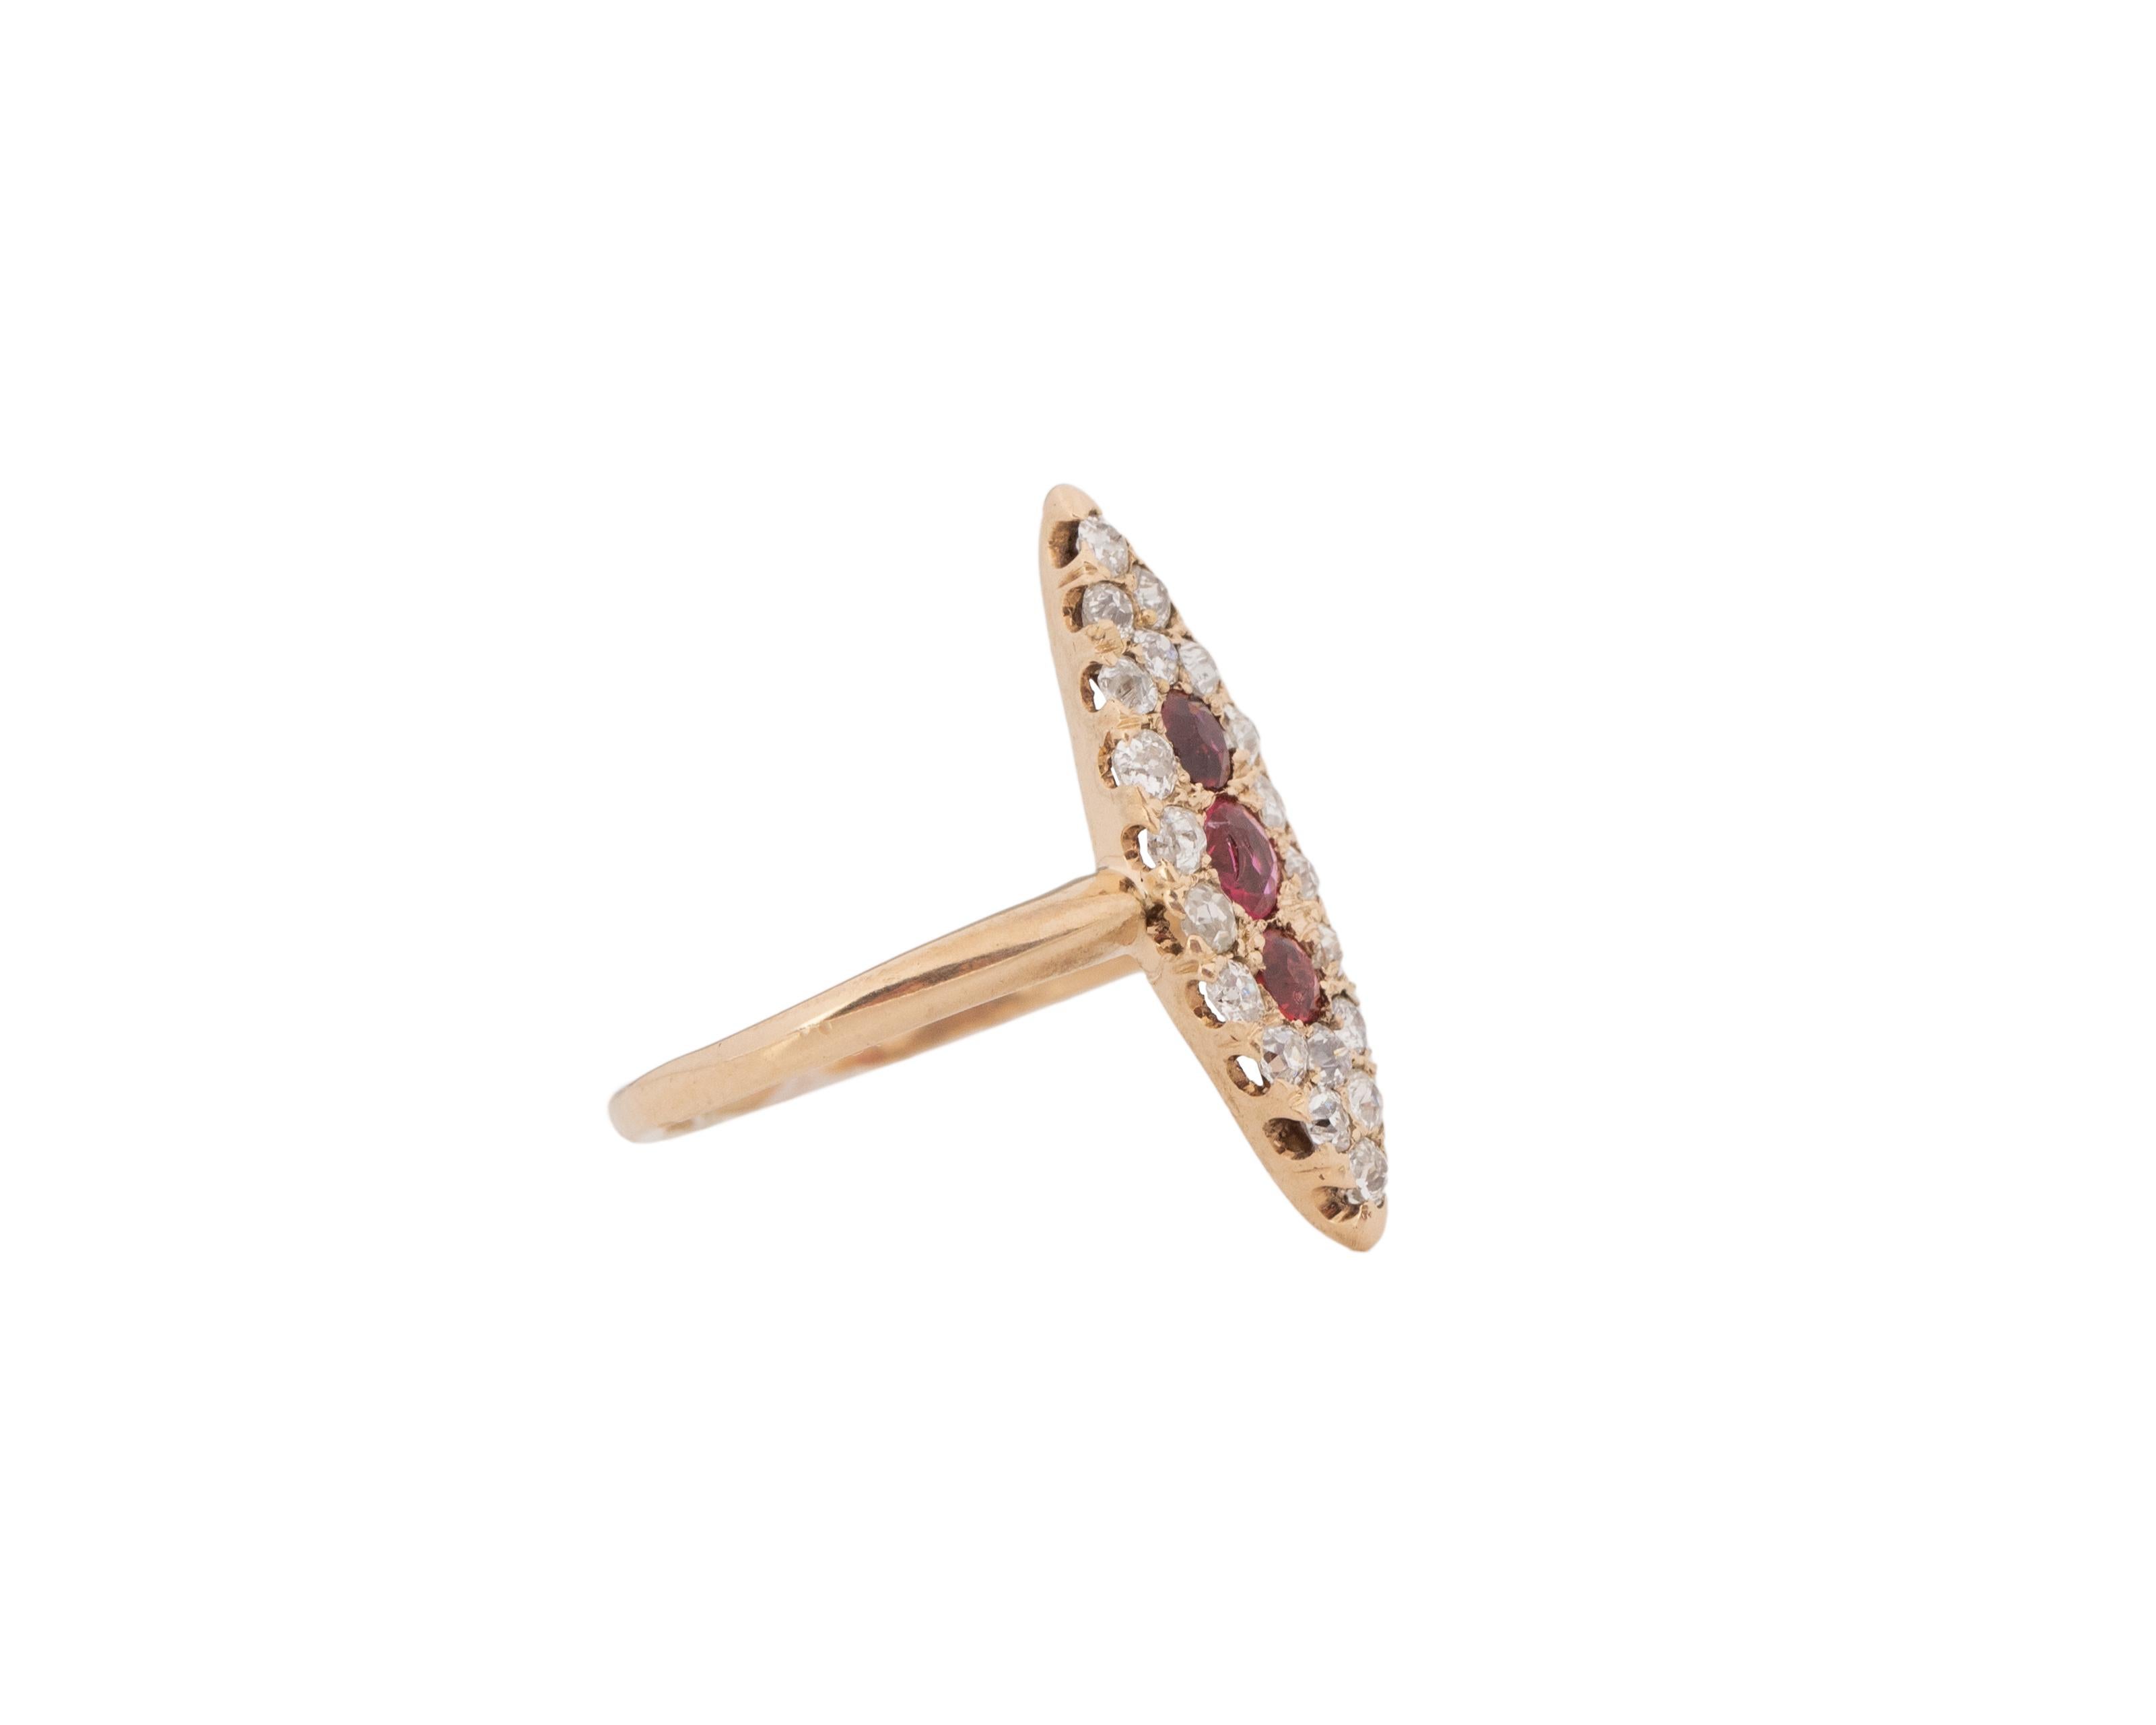 Ring Size: 6.26
Metal Type: 14K Rose Gold [Hallmarked, and Tested]
Weight: 2.08 grams

Center Stone Details:
Type: Ruby, Natural
Weight: .40ct, total weight
Cut: Old European brilliant
Color: Red

Diamonds: Natural, Antique Cut, G-J Colors

Finger